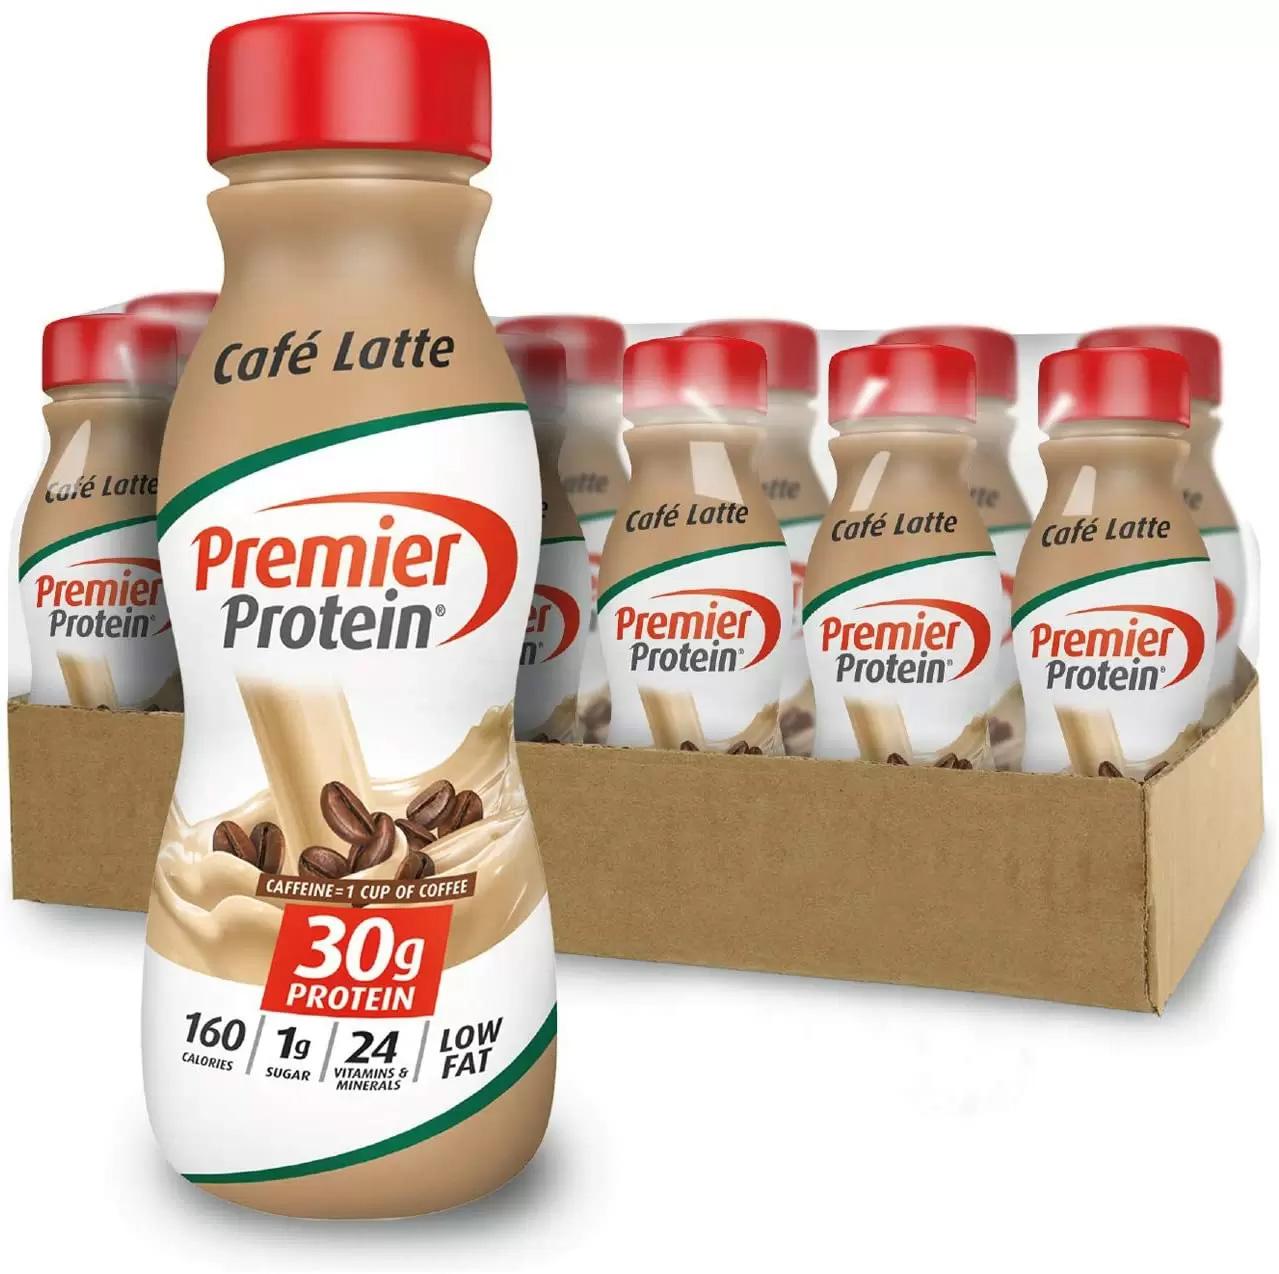 12 Premier Protein Shake for $17.09 Shipped